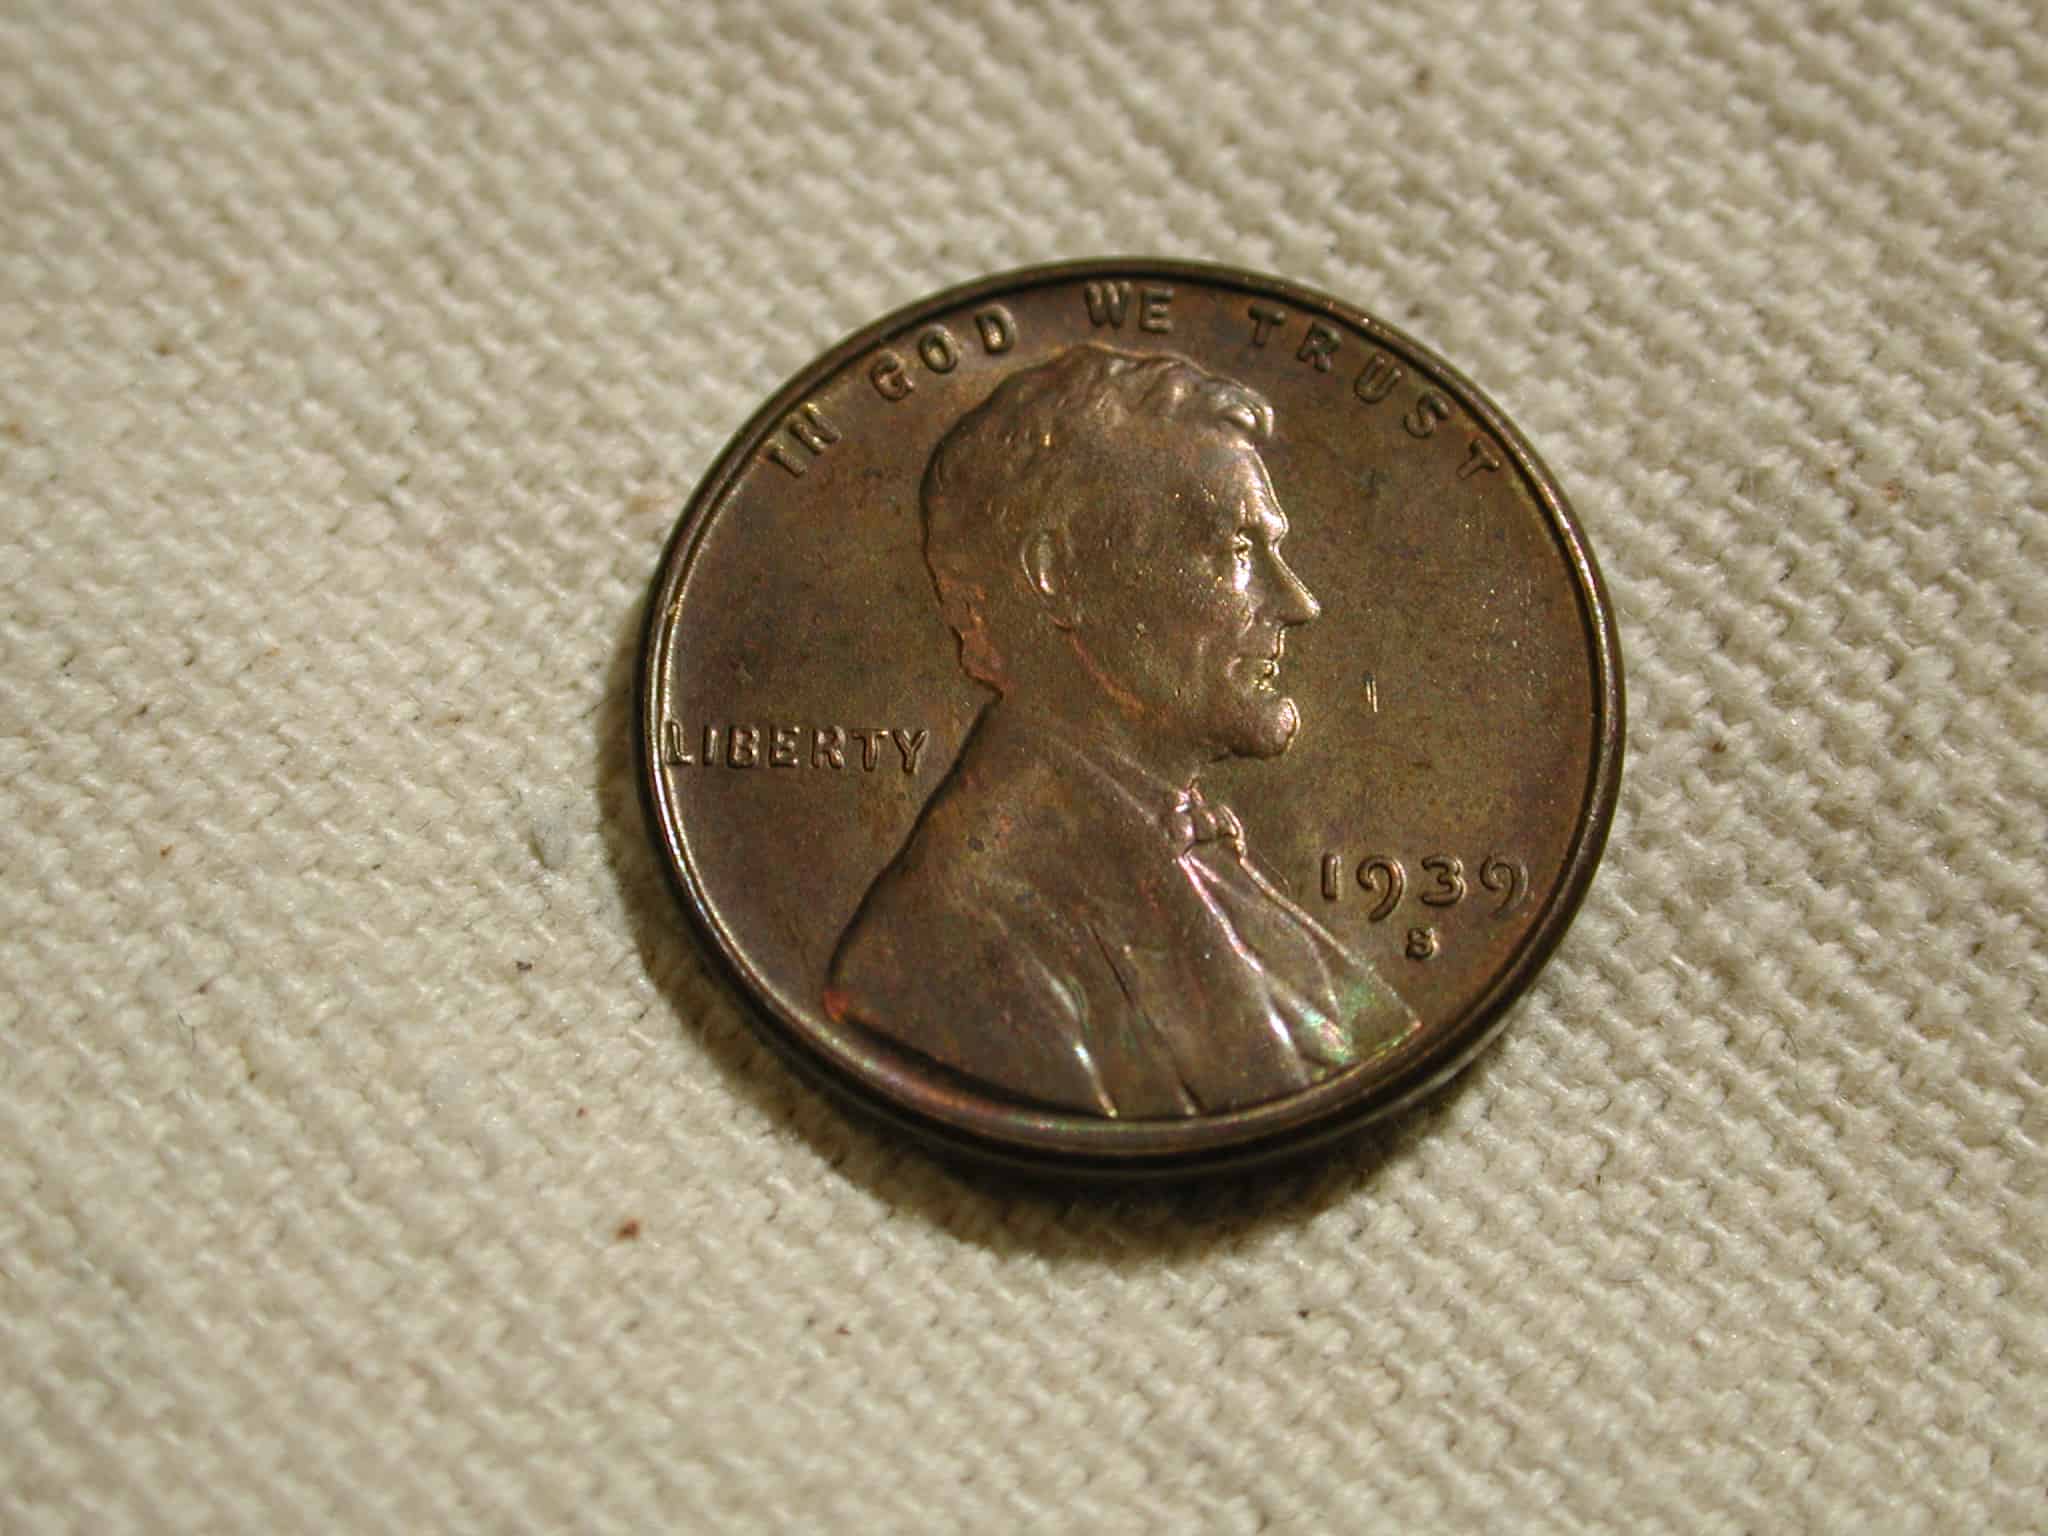 Value of the 1939 Penny